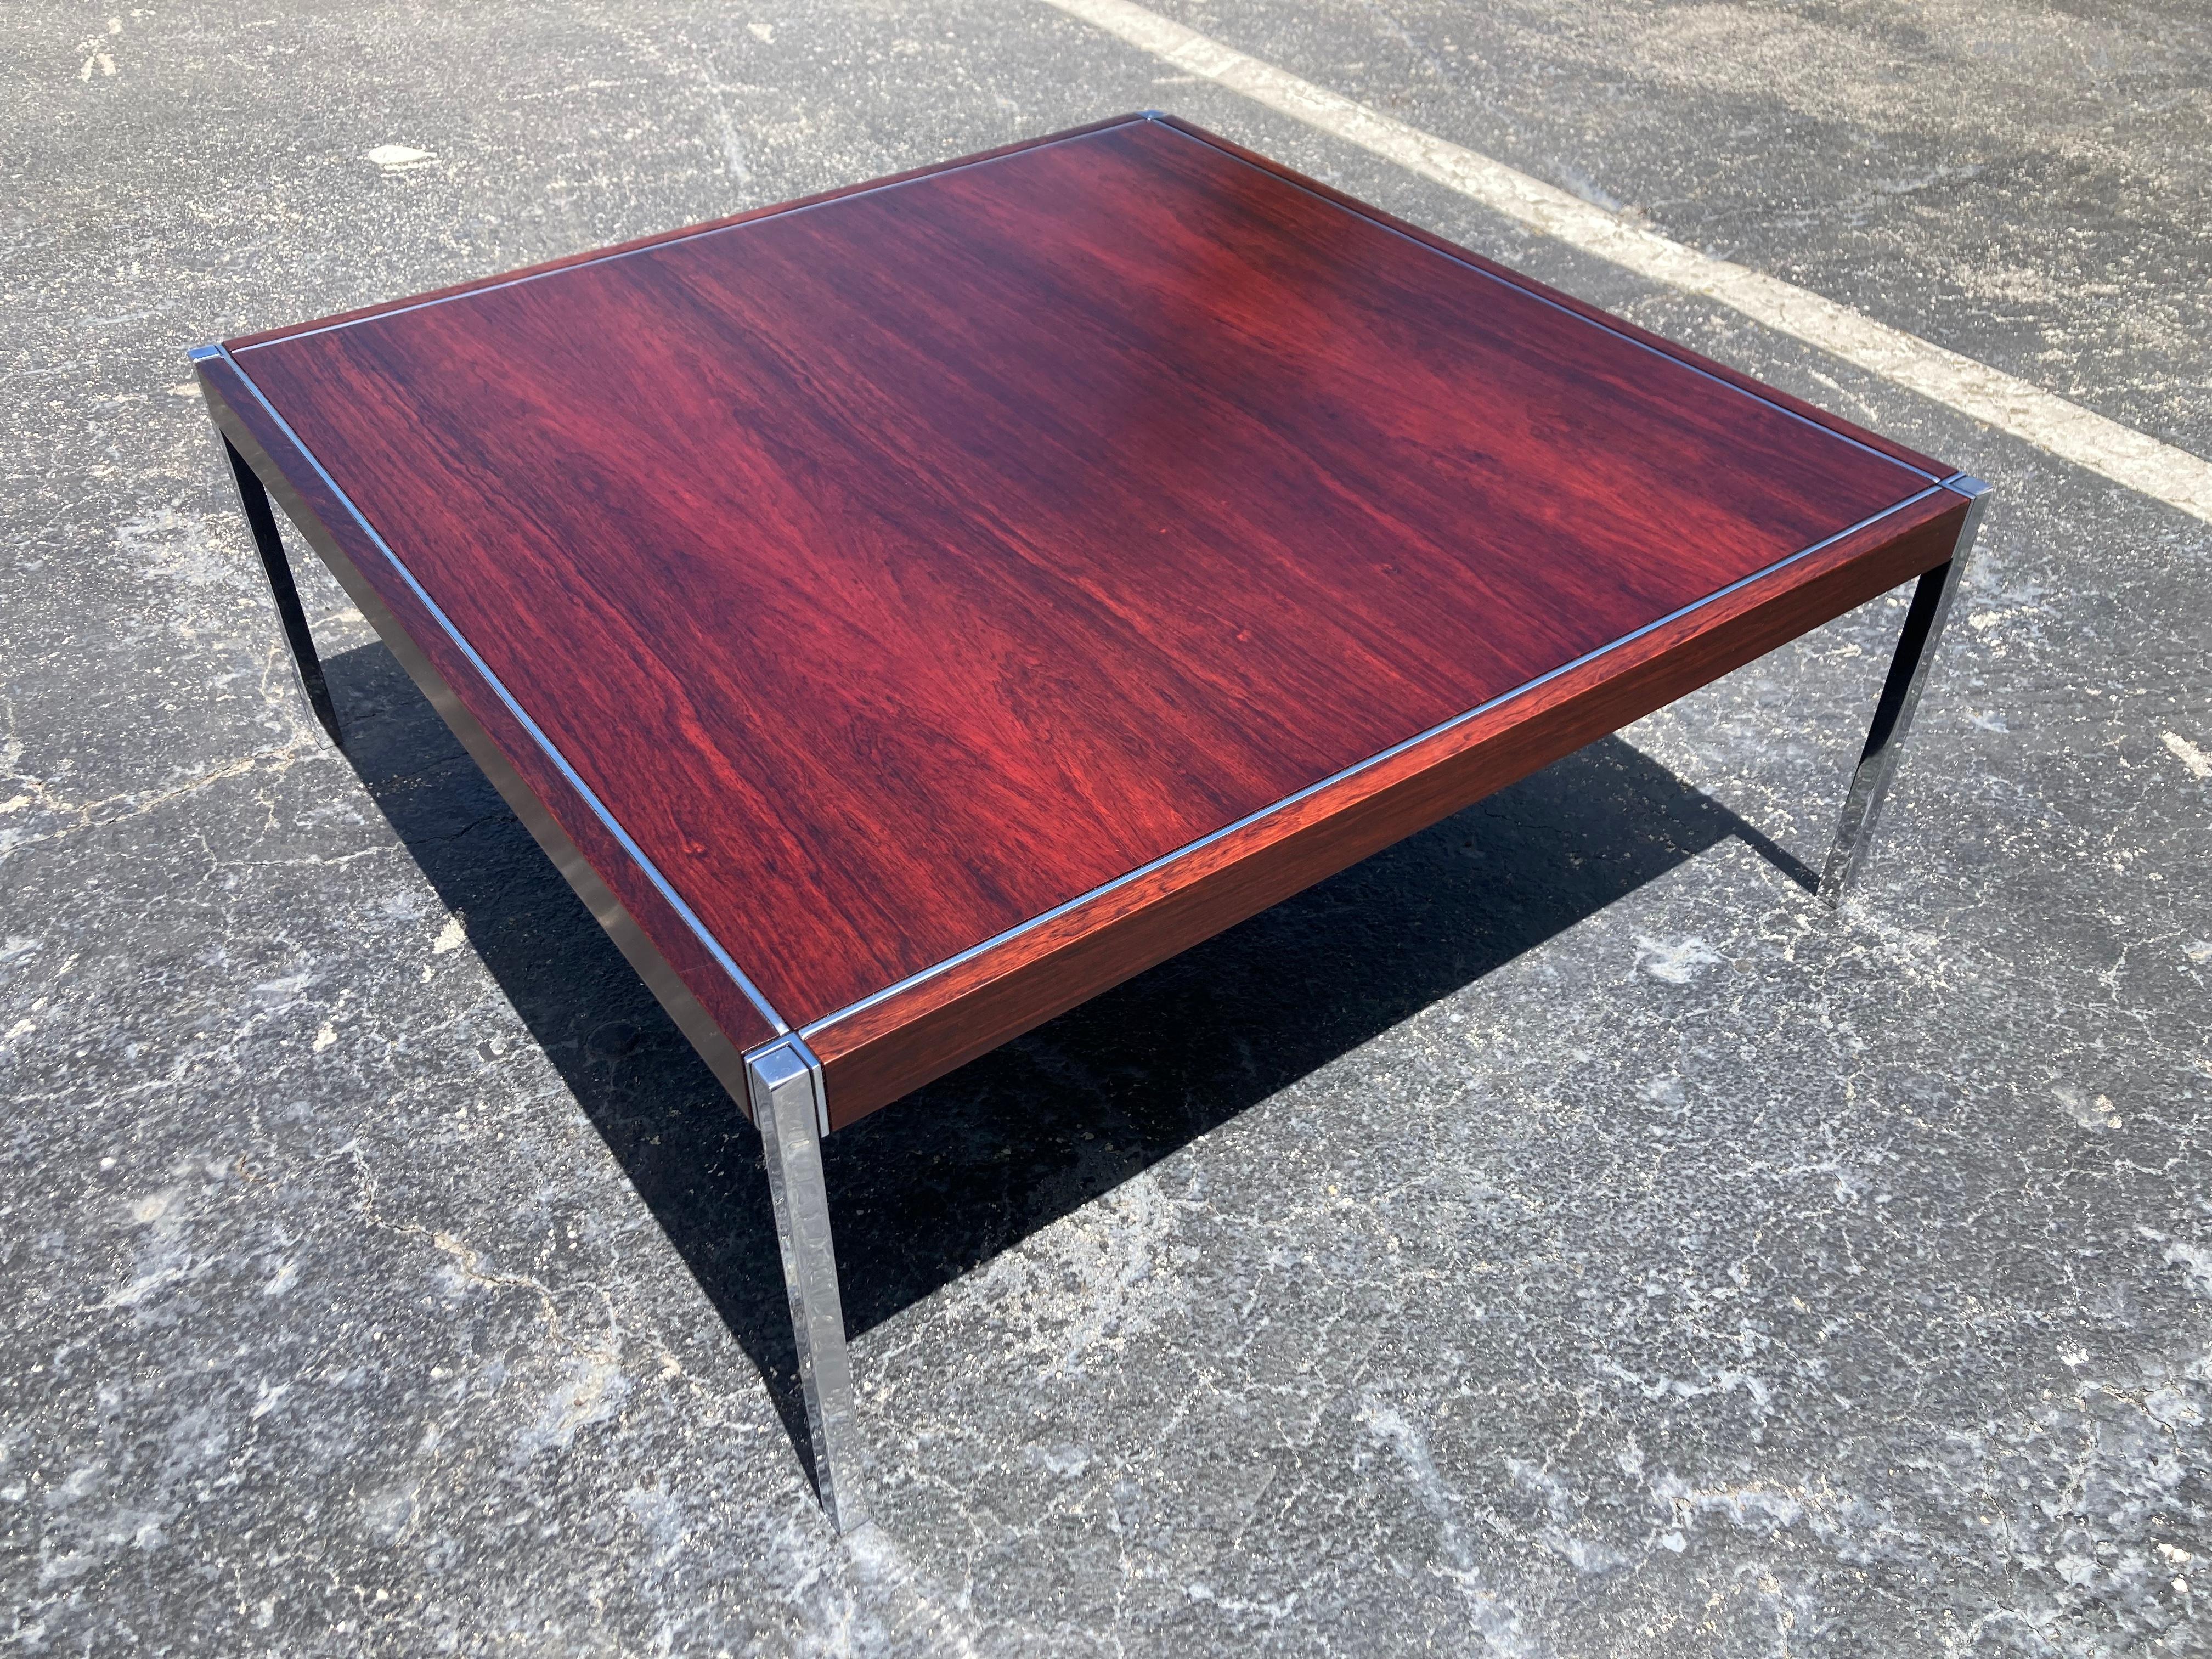 Original Richard Schultz Rosewood Coffee Table for Knoll, 1970s For Sale 5